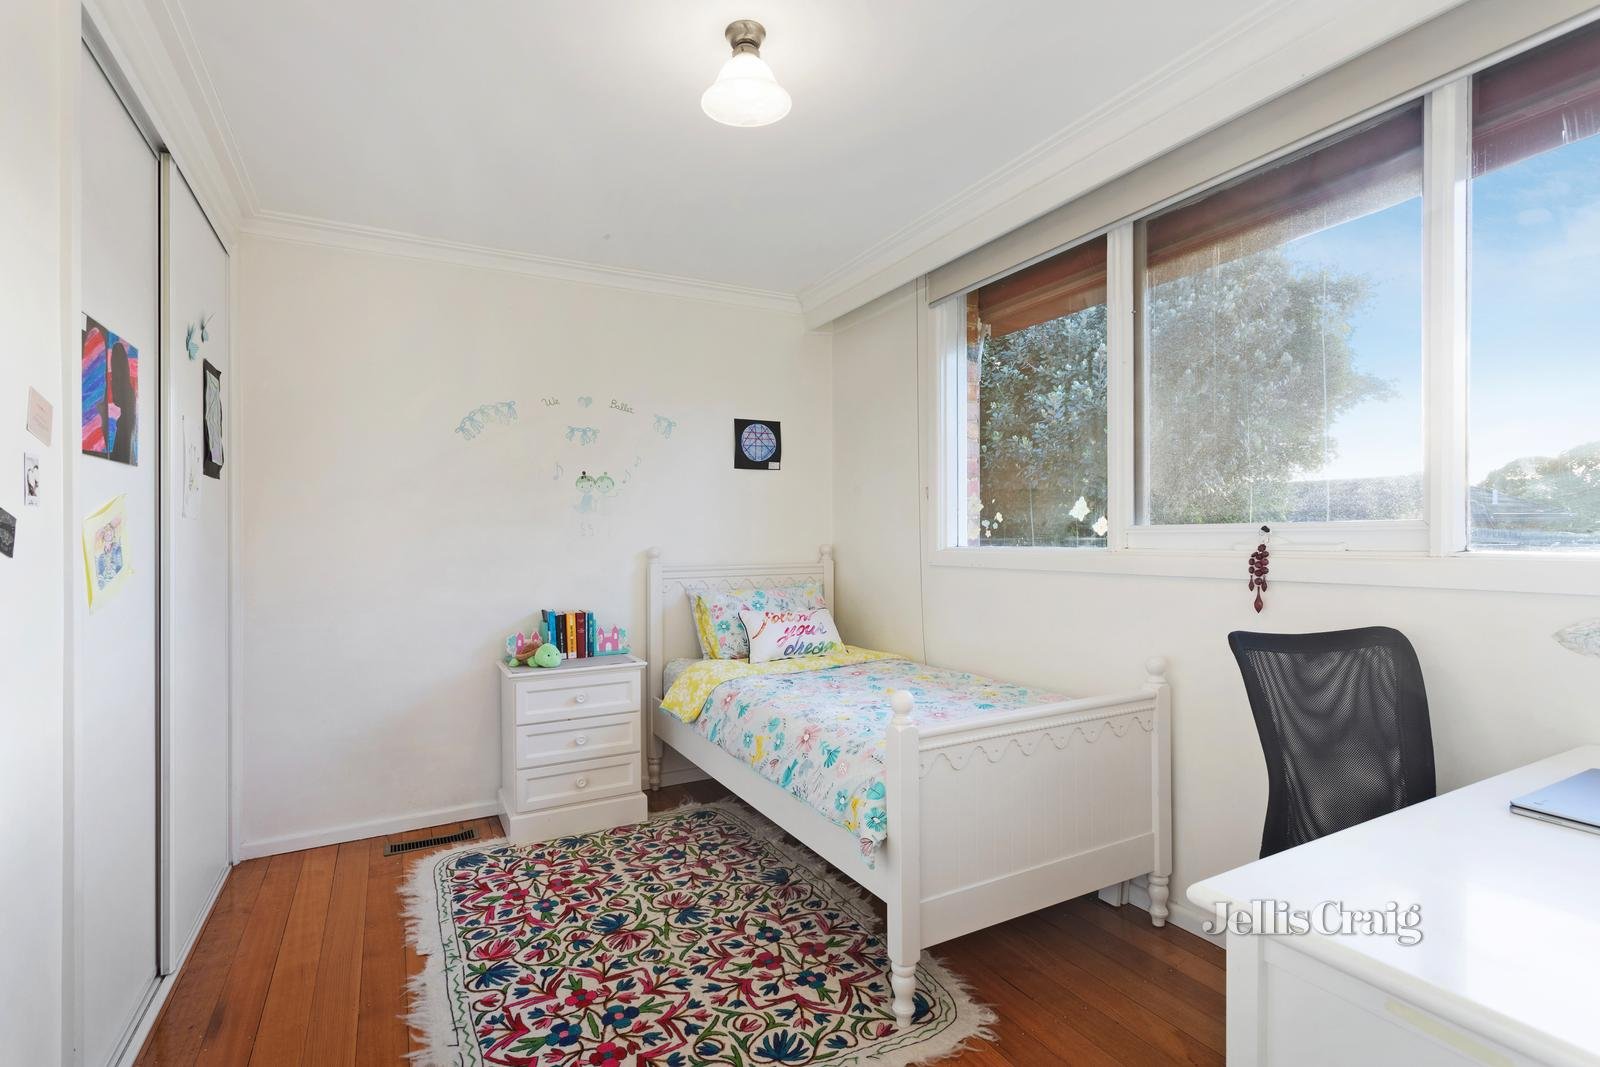 27 Westerfield Drive, Notting Hill image 7